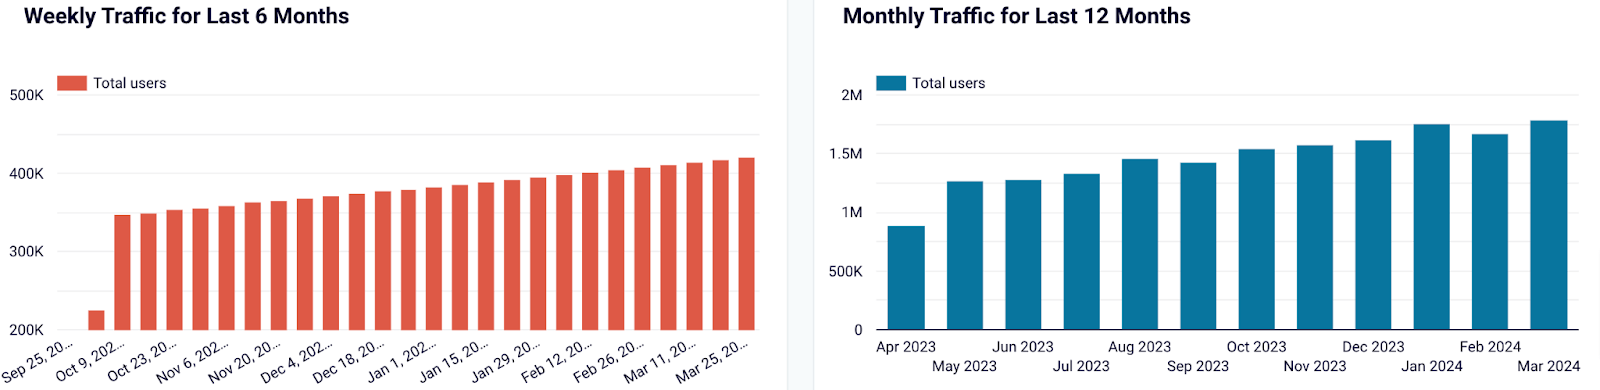 2.17 weekly and monthly traffic